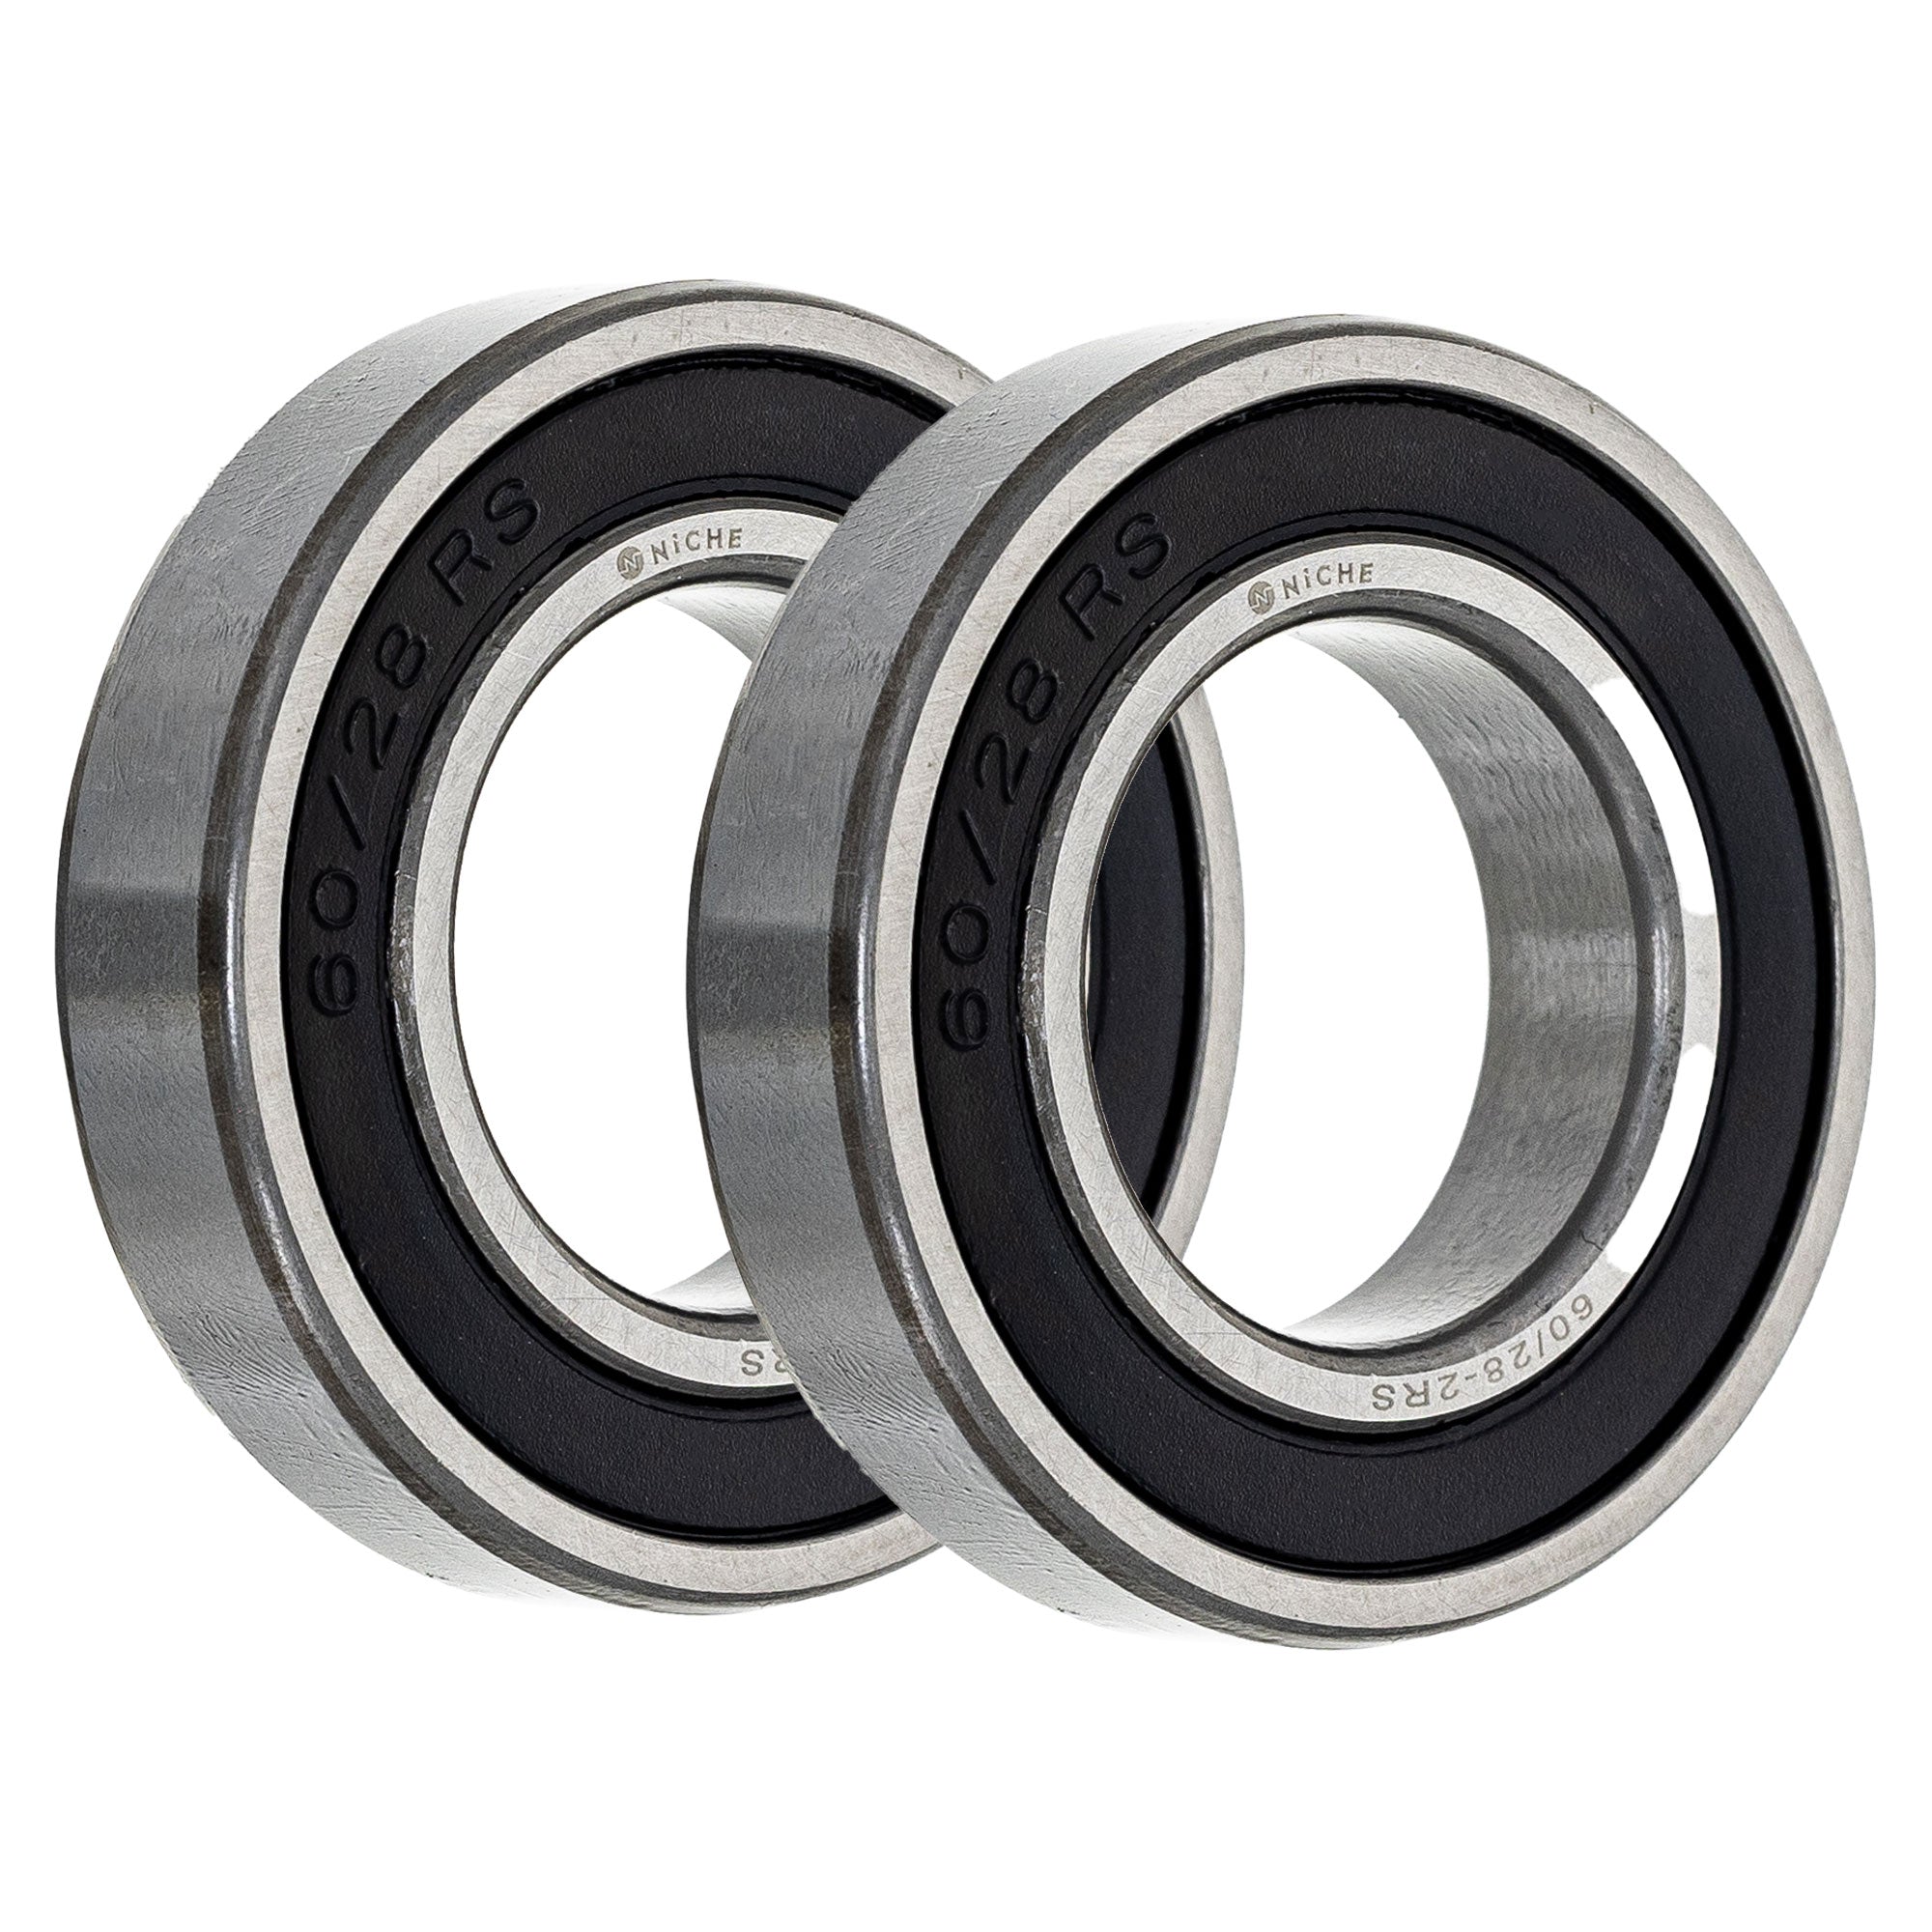 Single Row, Deep Groove, Ball Bearing Pack of 2 2-Pack for zOTHER ZZR600 Zephyr Z1000 NICHE 519-CBB2264R